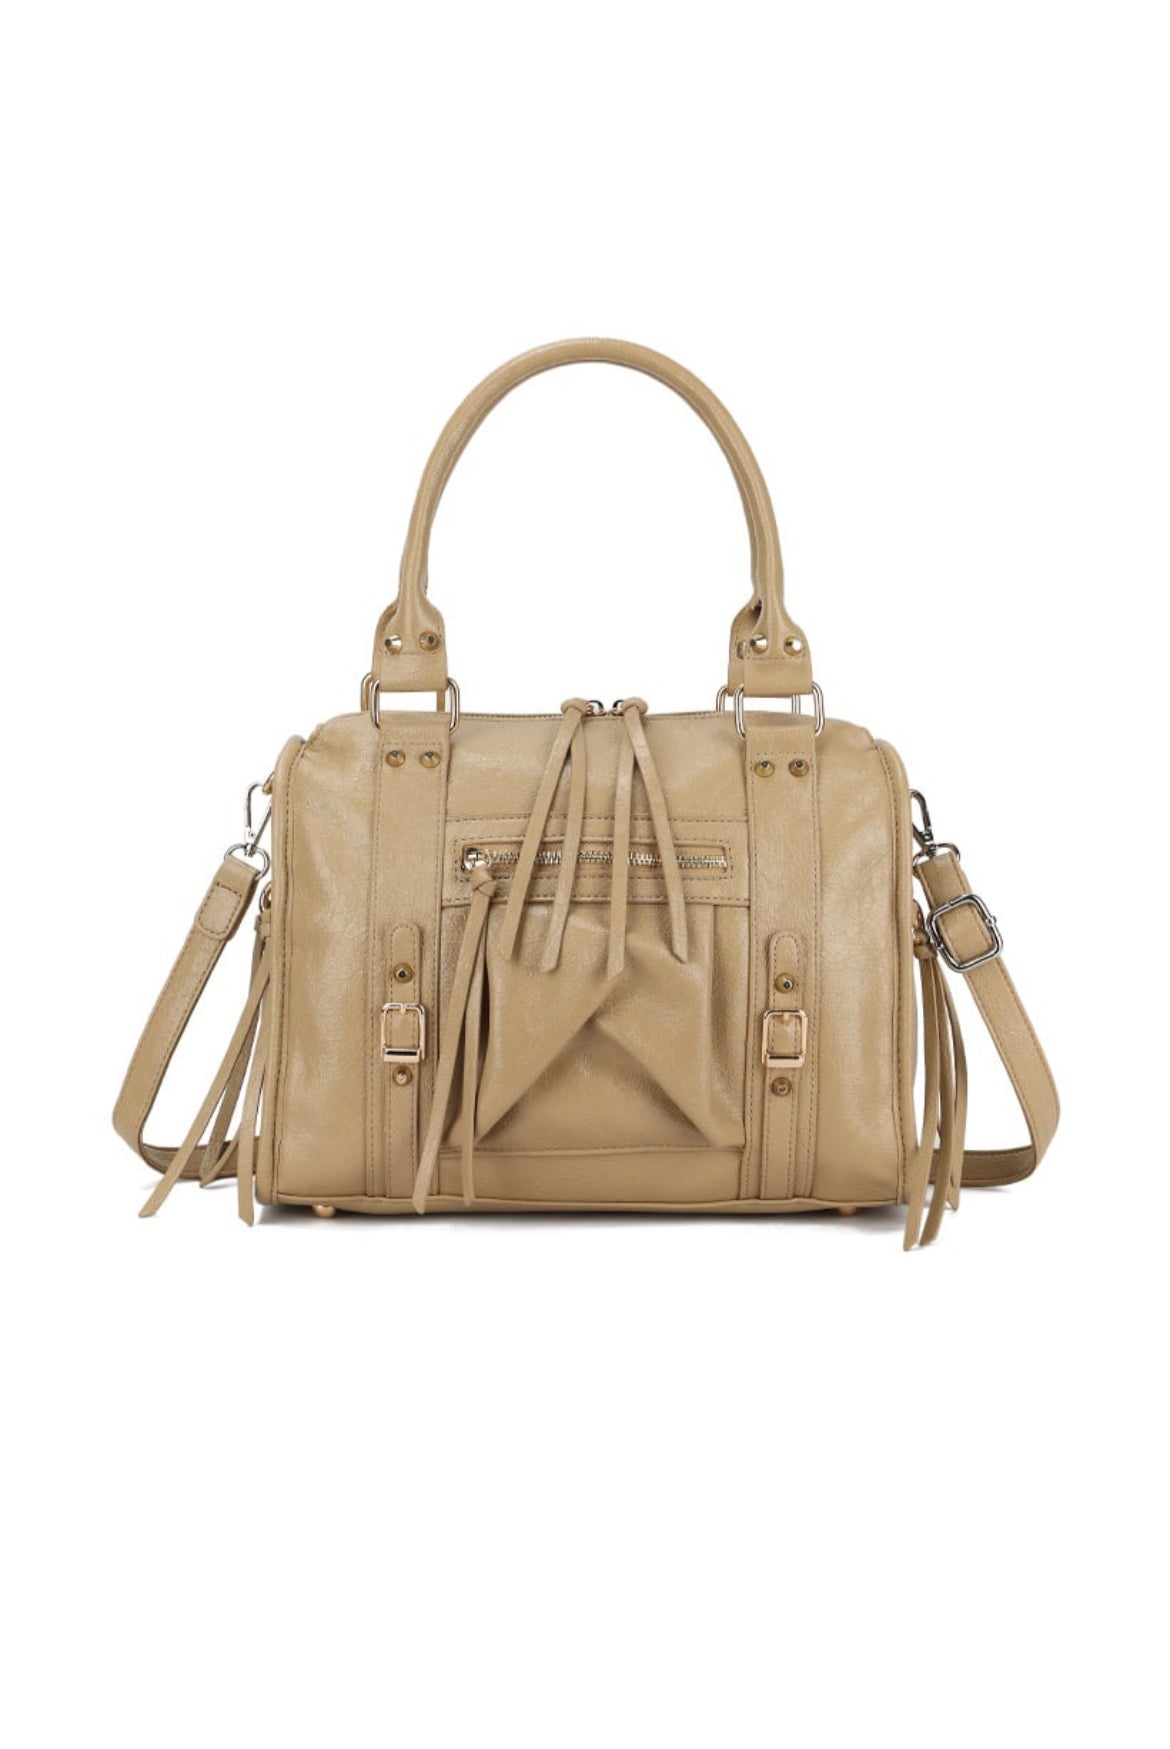 IT GIRL BAG TAUPE - My Favourites